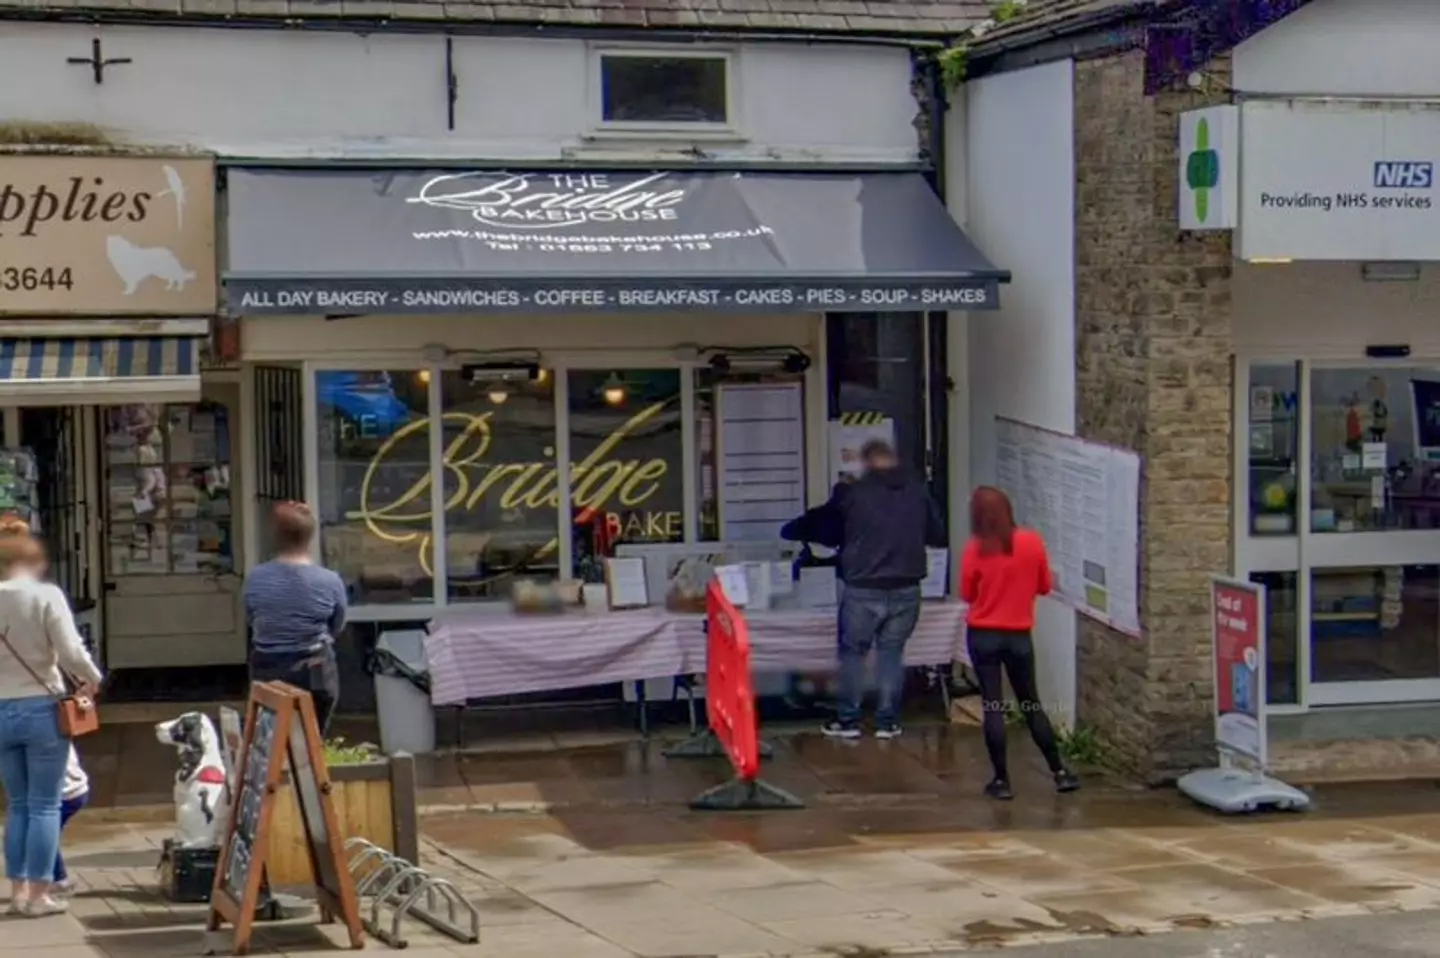 A café in Derbyshire has received a threatening letter about the name of one of its sandwiches.